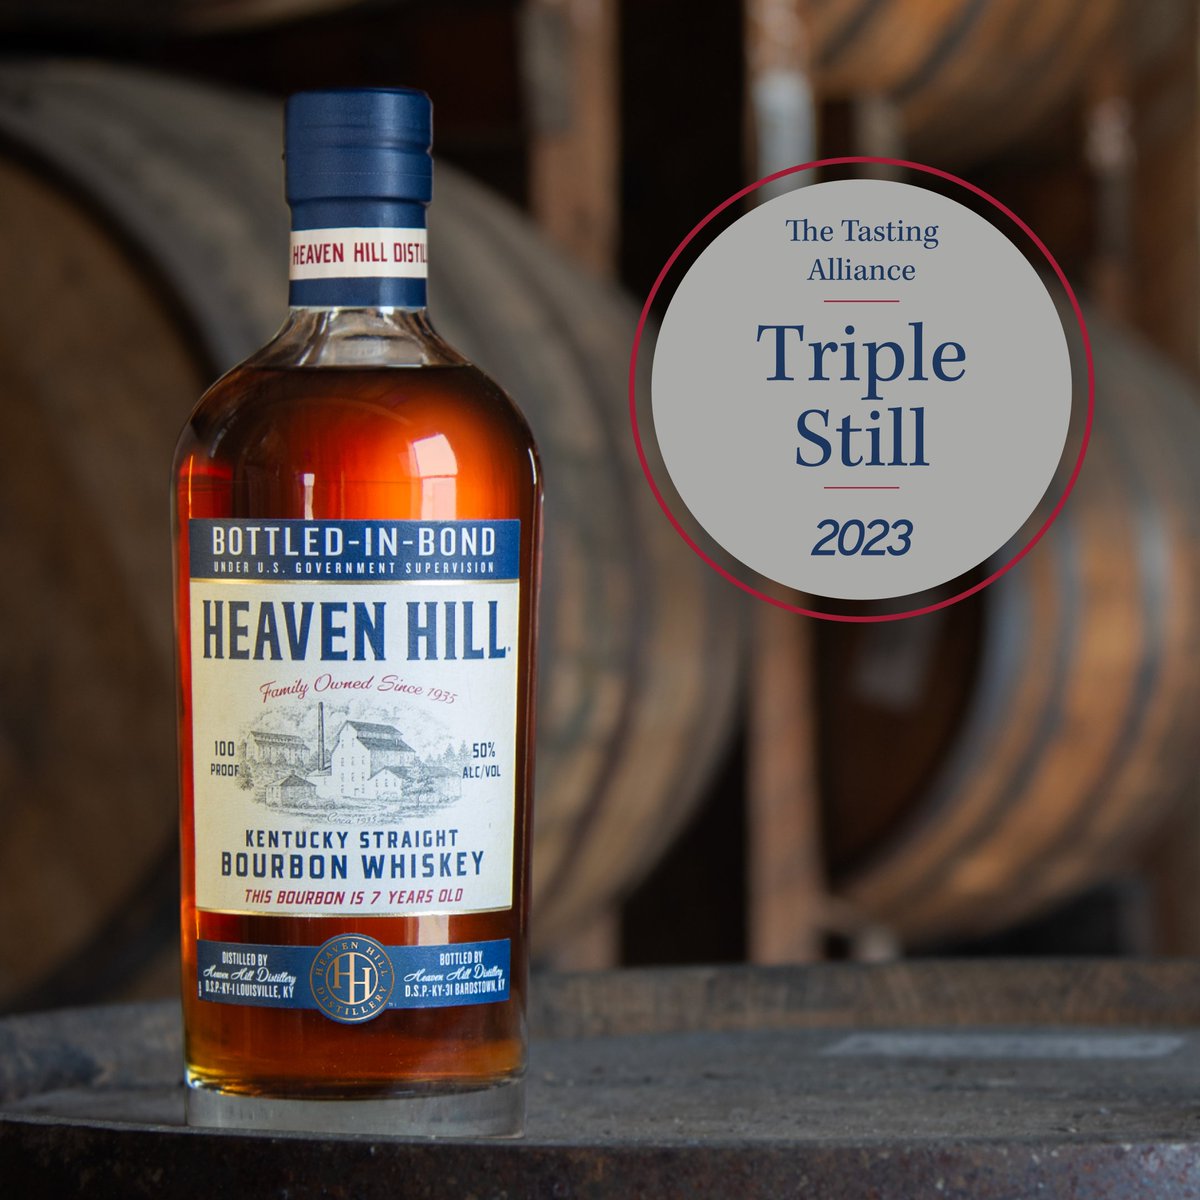 Heaven Hill Bottled-in-Bond is now a Triple Still winner: earning Double Gold at the 2023 San Francisco World Spirits Competition, Singapore World Spirits Competition and New York World Spirits Competition. Find a bottle to try it for yourself.